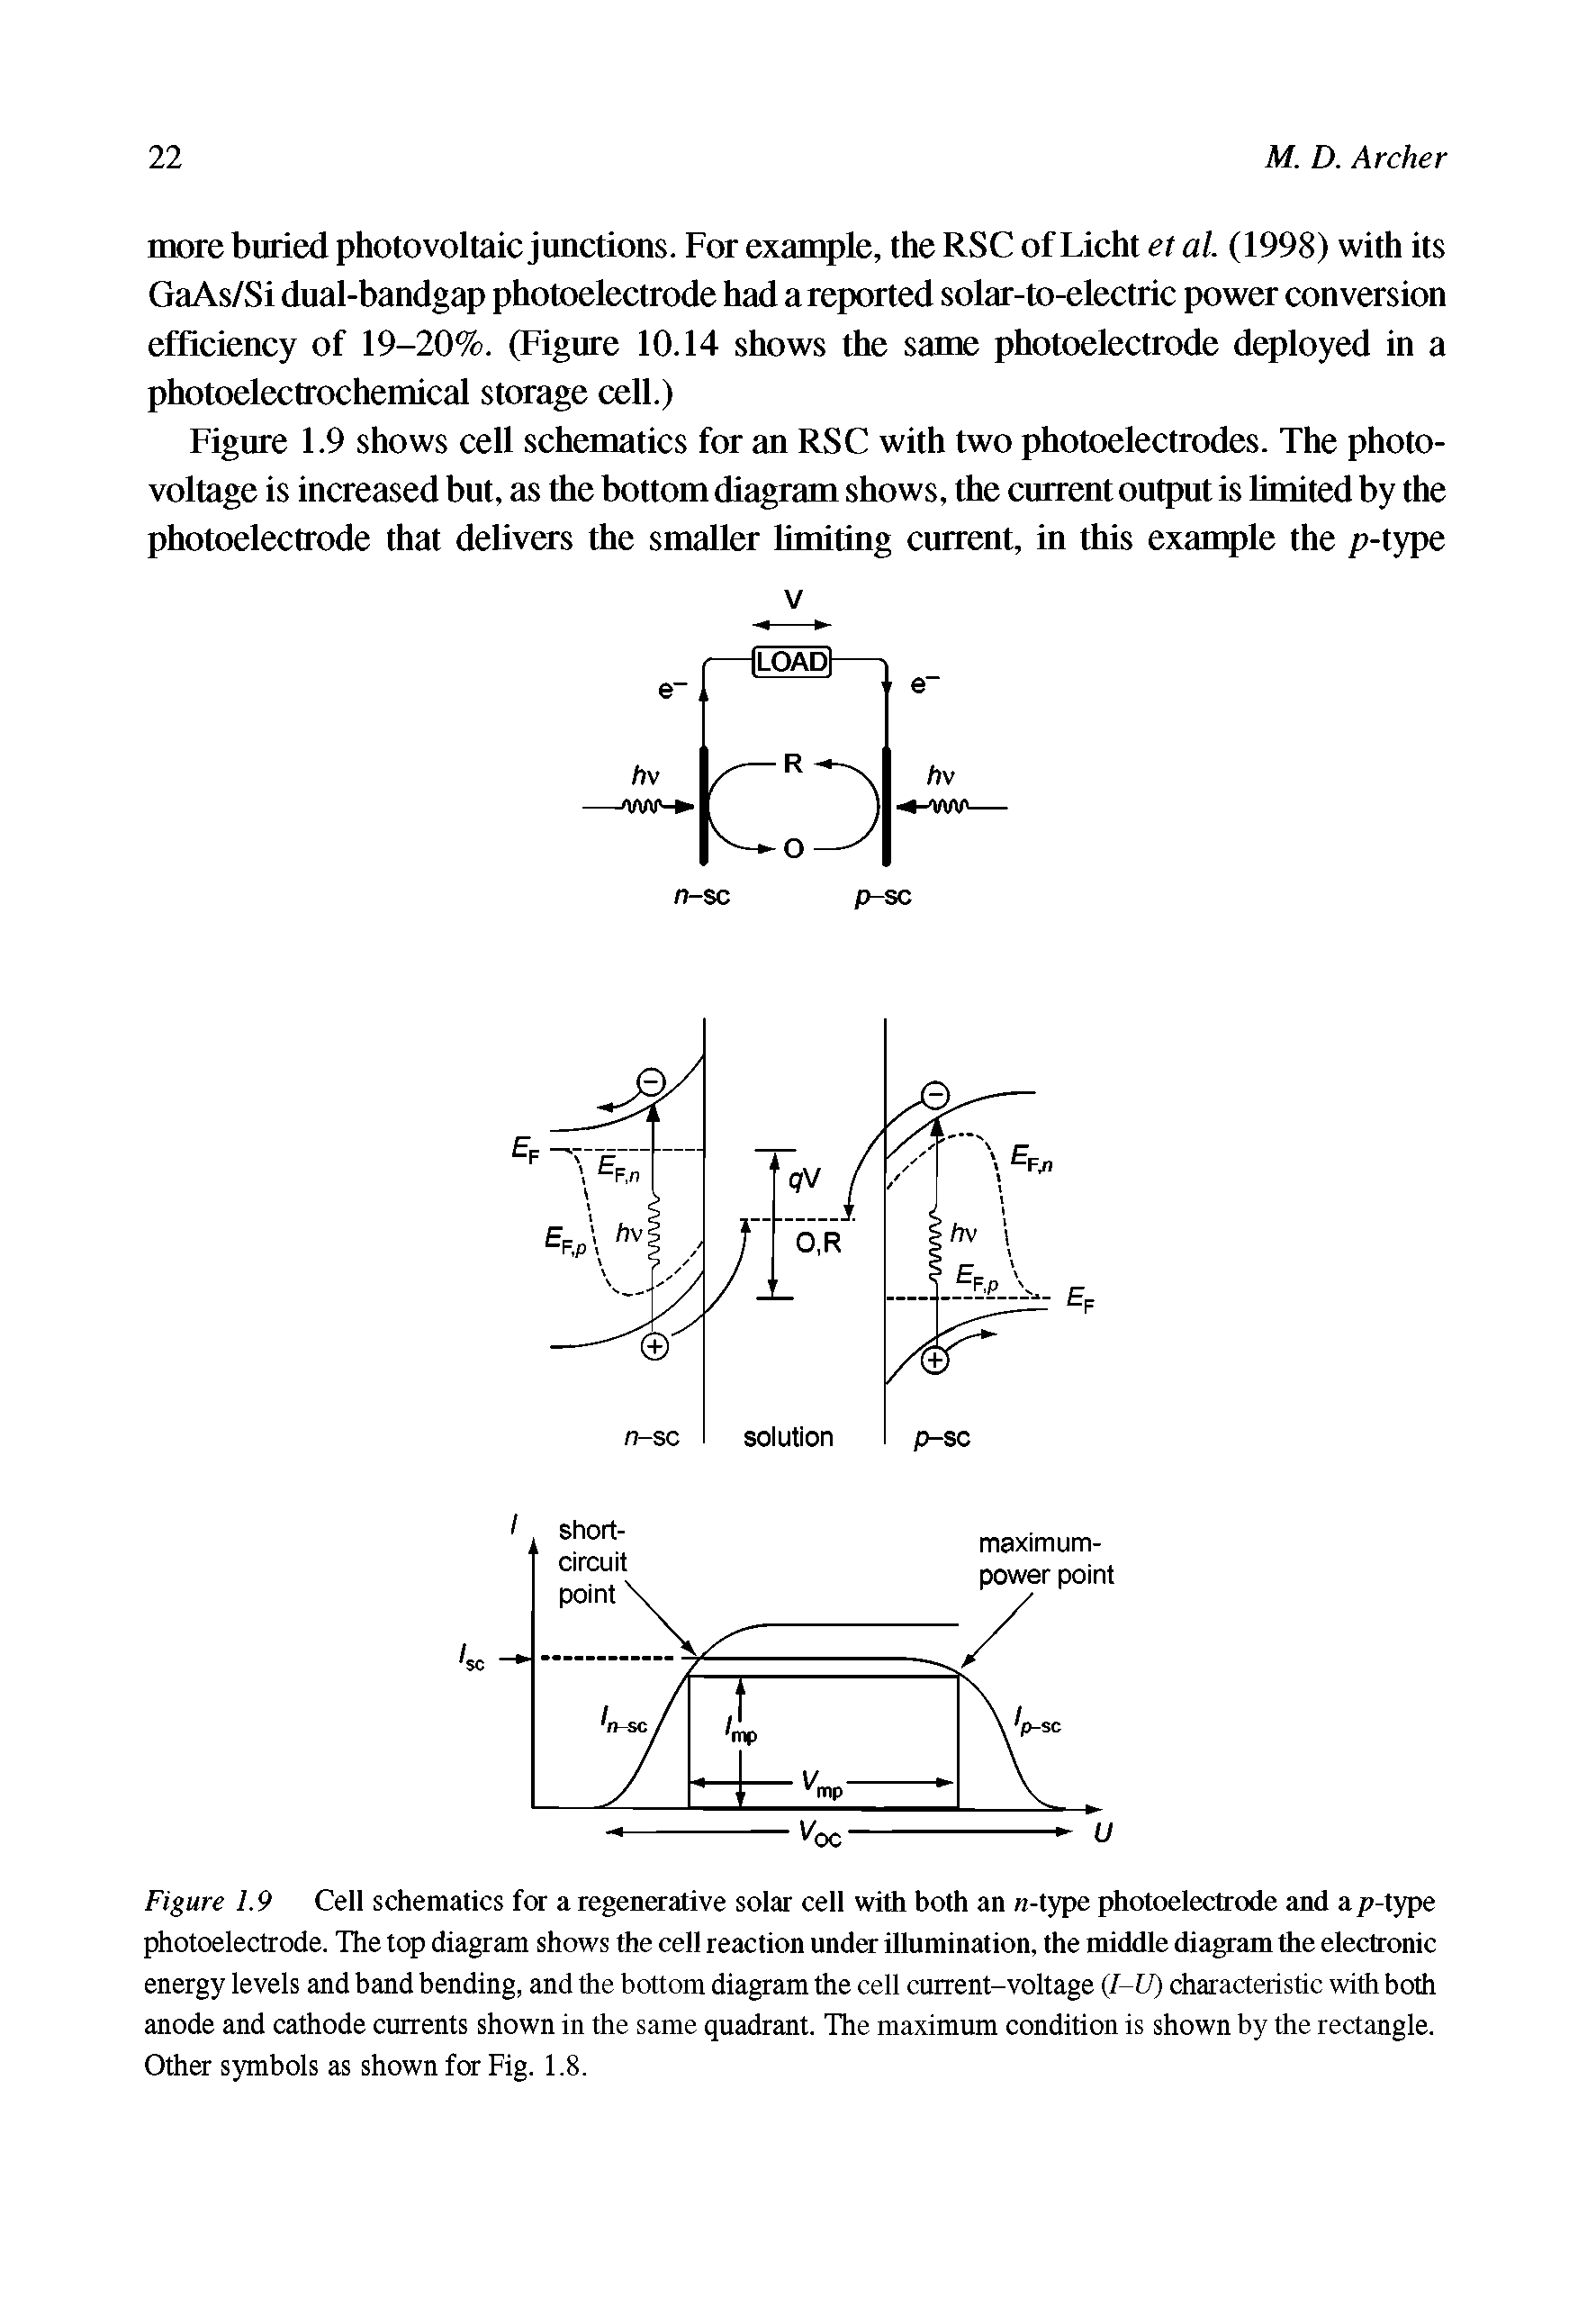 Figure 1.9 Cell schematics for a regenerative solar cell with both an ra-type photoelectrode and a p-type photoelectrode. The top diagram shows the cell reaction under illumination, the middle diagram the electronic energy levels and band bending, and the bottom diagram the cell current-voltage (I-U) characteristic with both anode and cathode currents shown in the same quadrant. The maximum condition is shown by the rectangle. Other symbols as shown for Fig. 1.8.